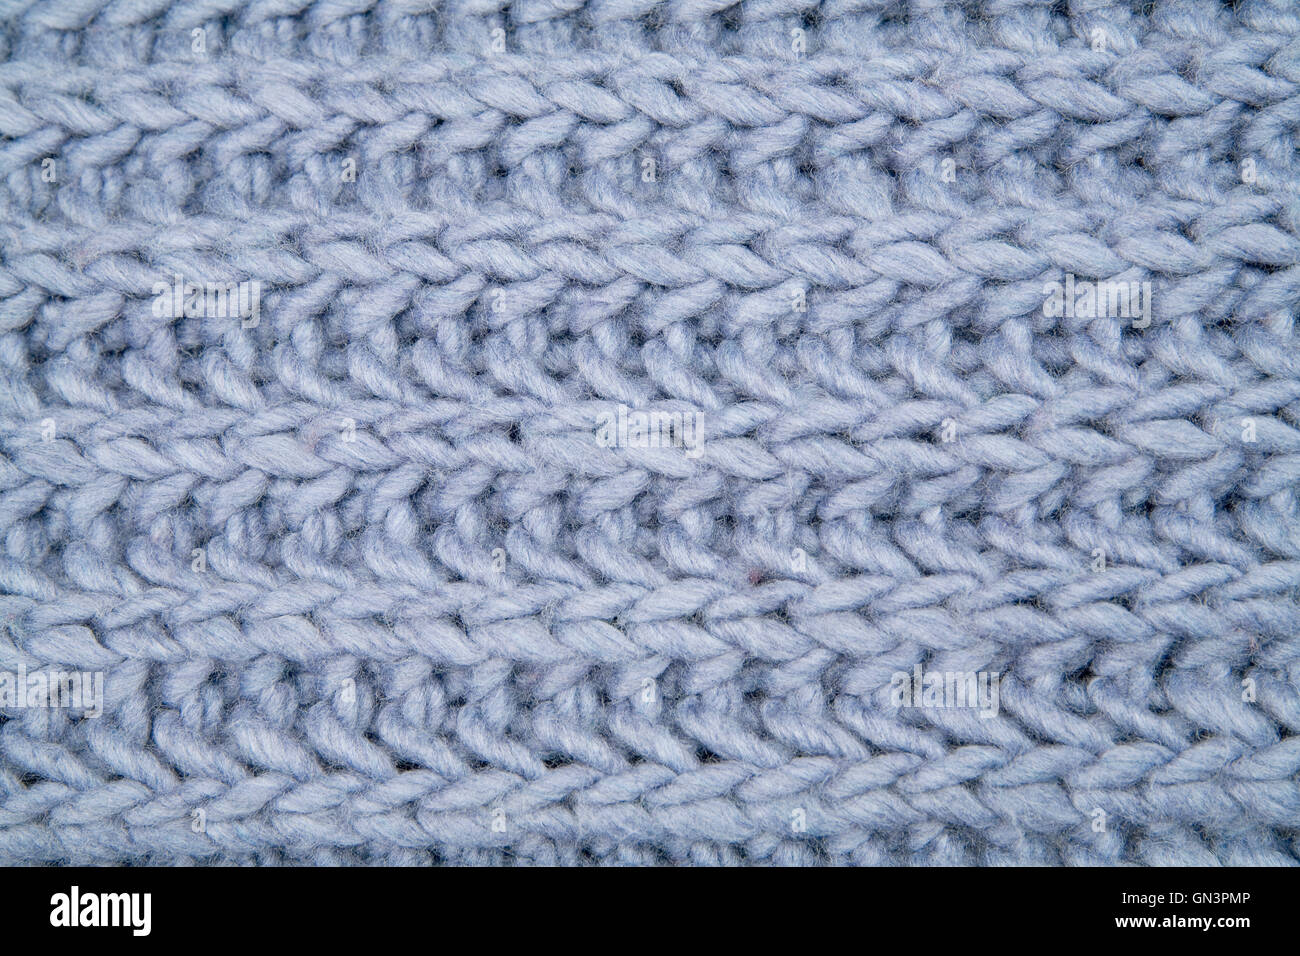 knitted material Stock Photo